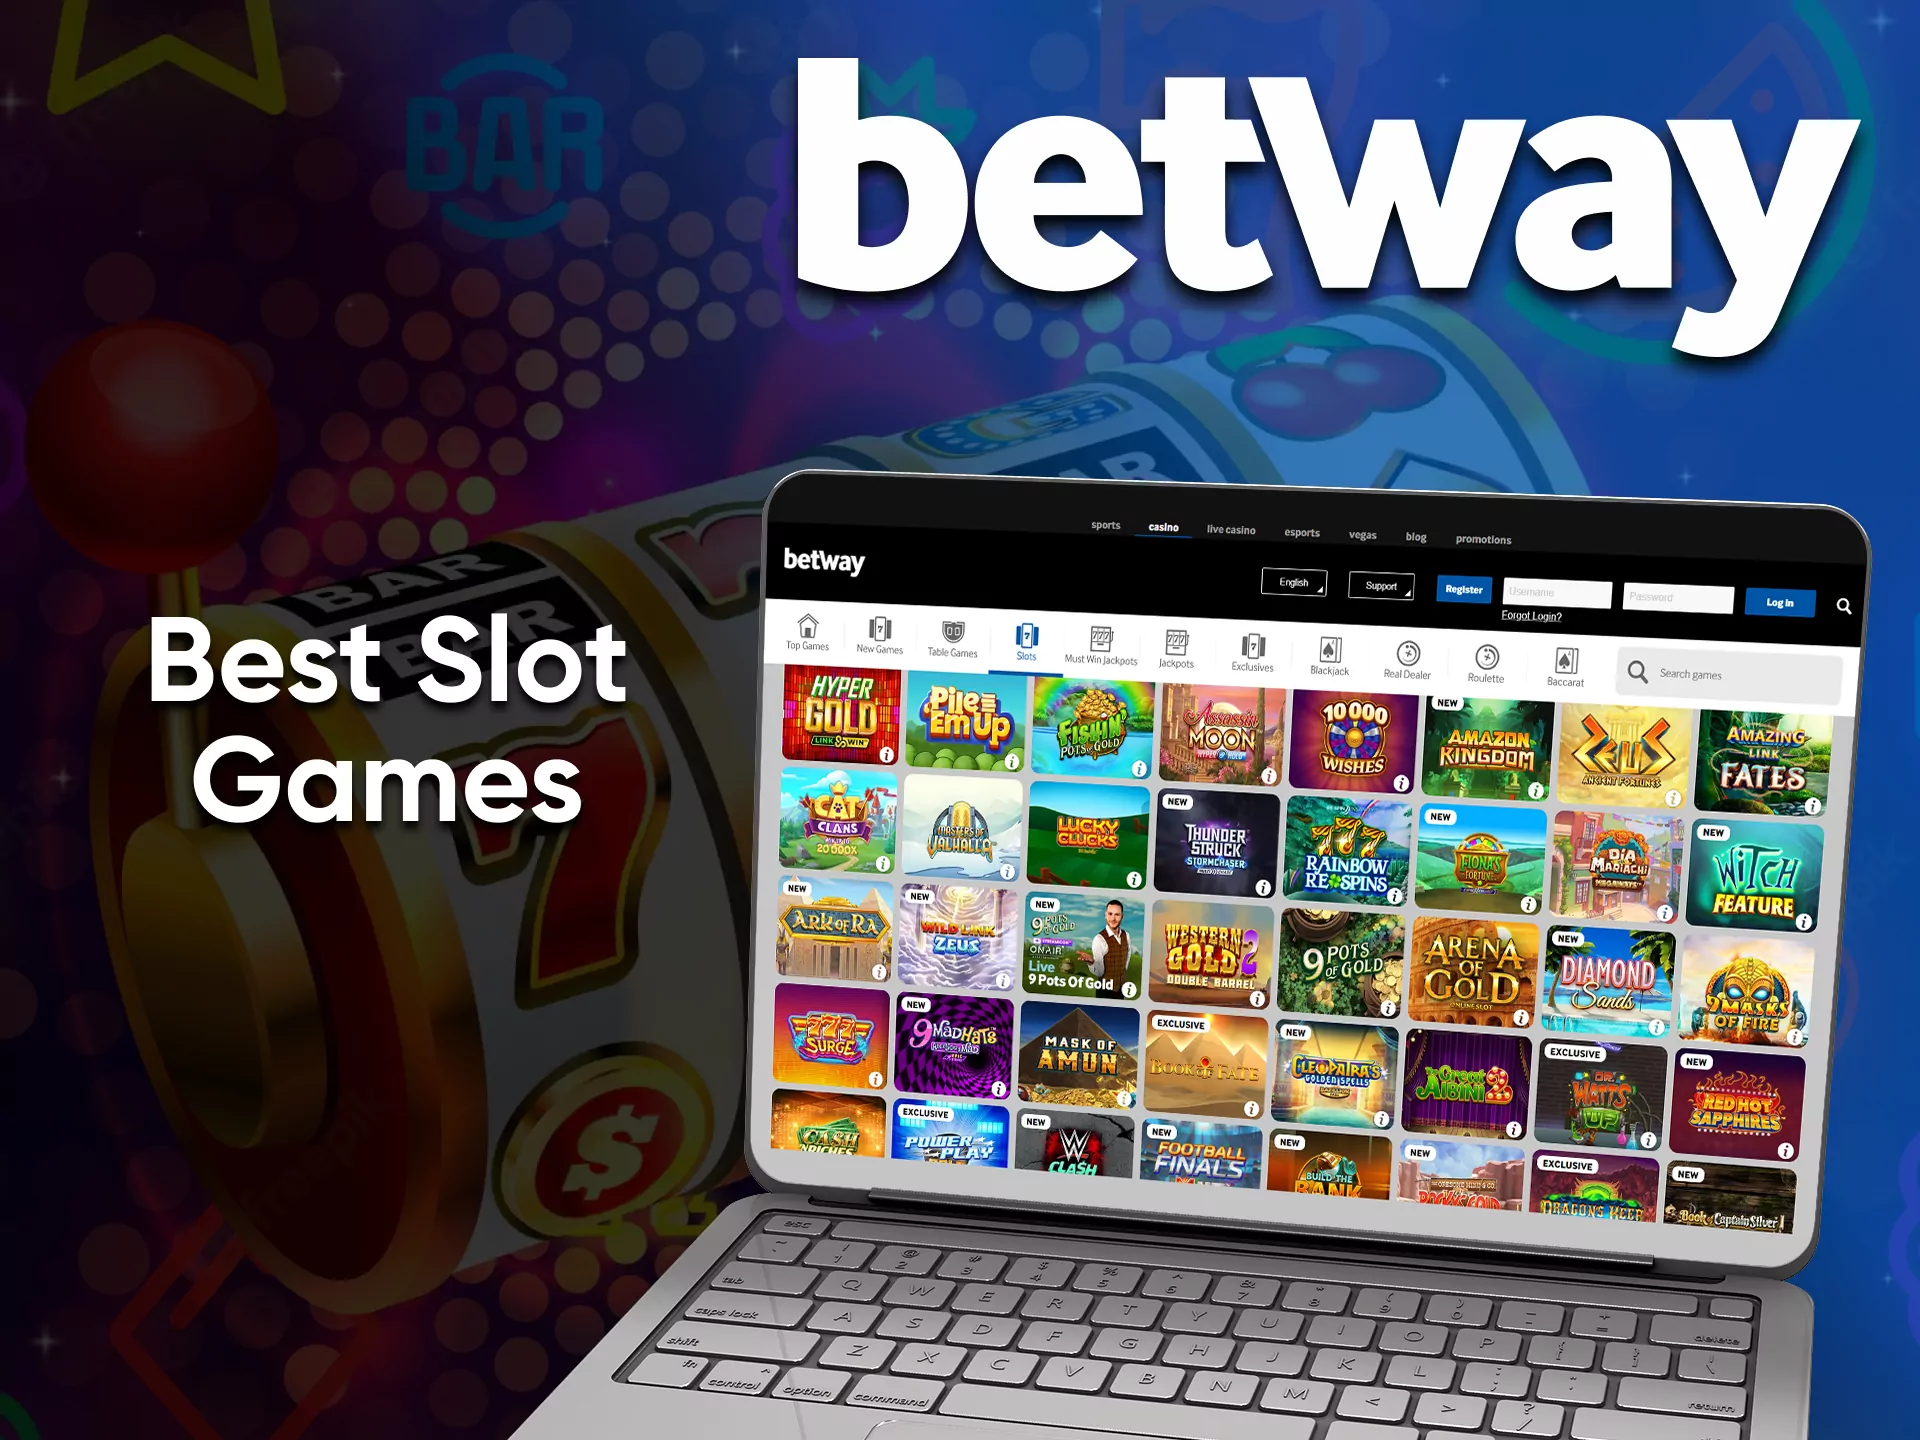 Choose Slots to enjoy playing casino games on Betway.